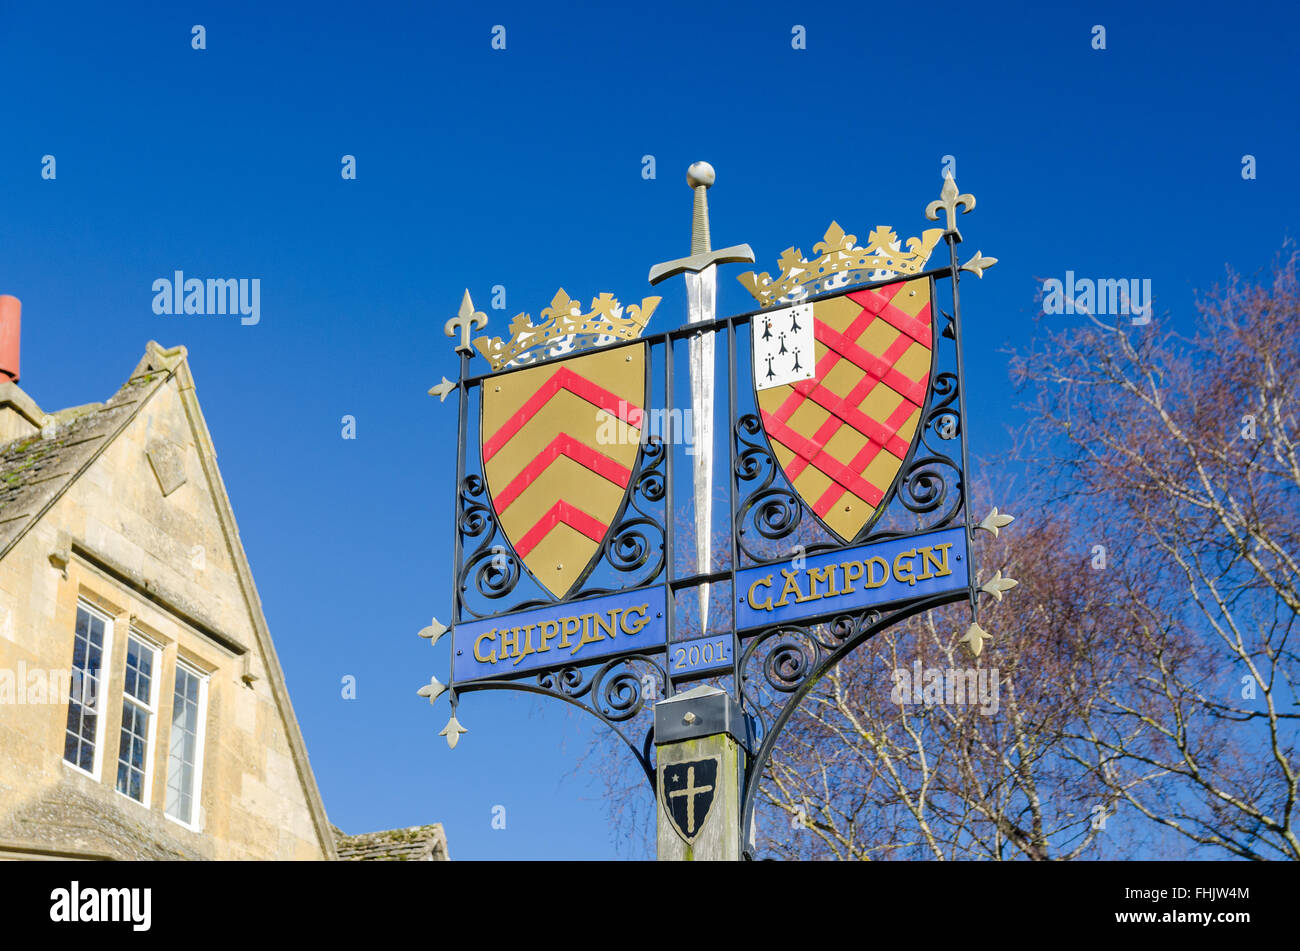 Ornate town sign for Chipping Campden in the Cotswolds Stock Photo